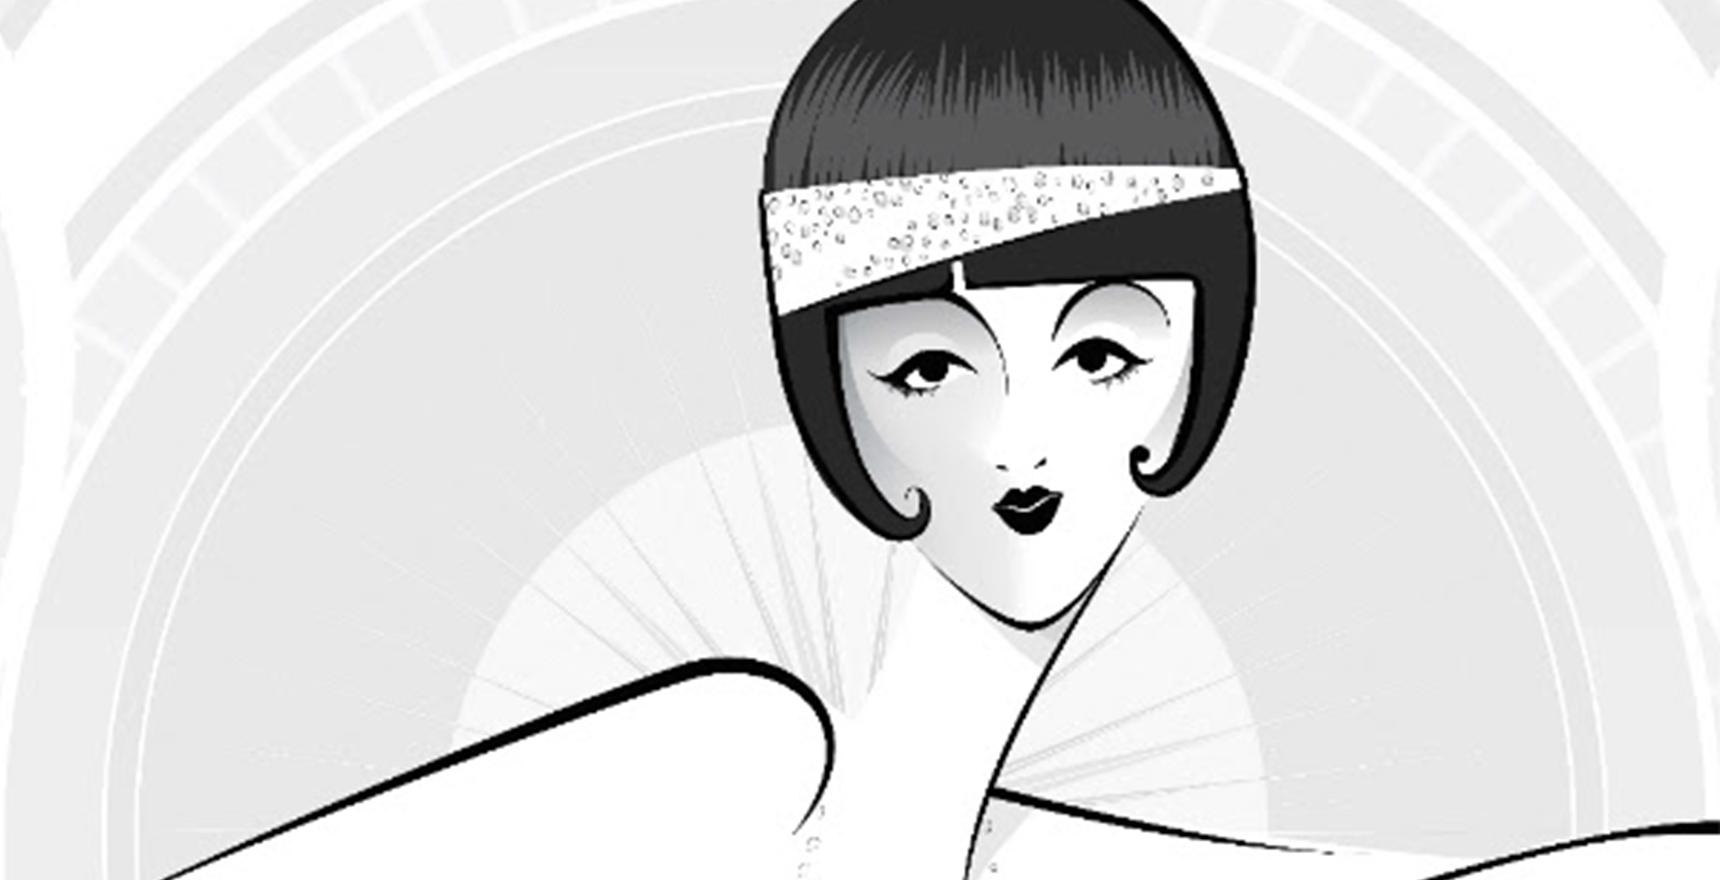 drawing of a flapper girl with headband